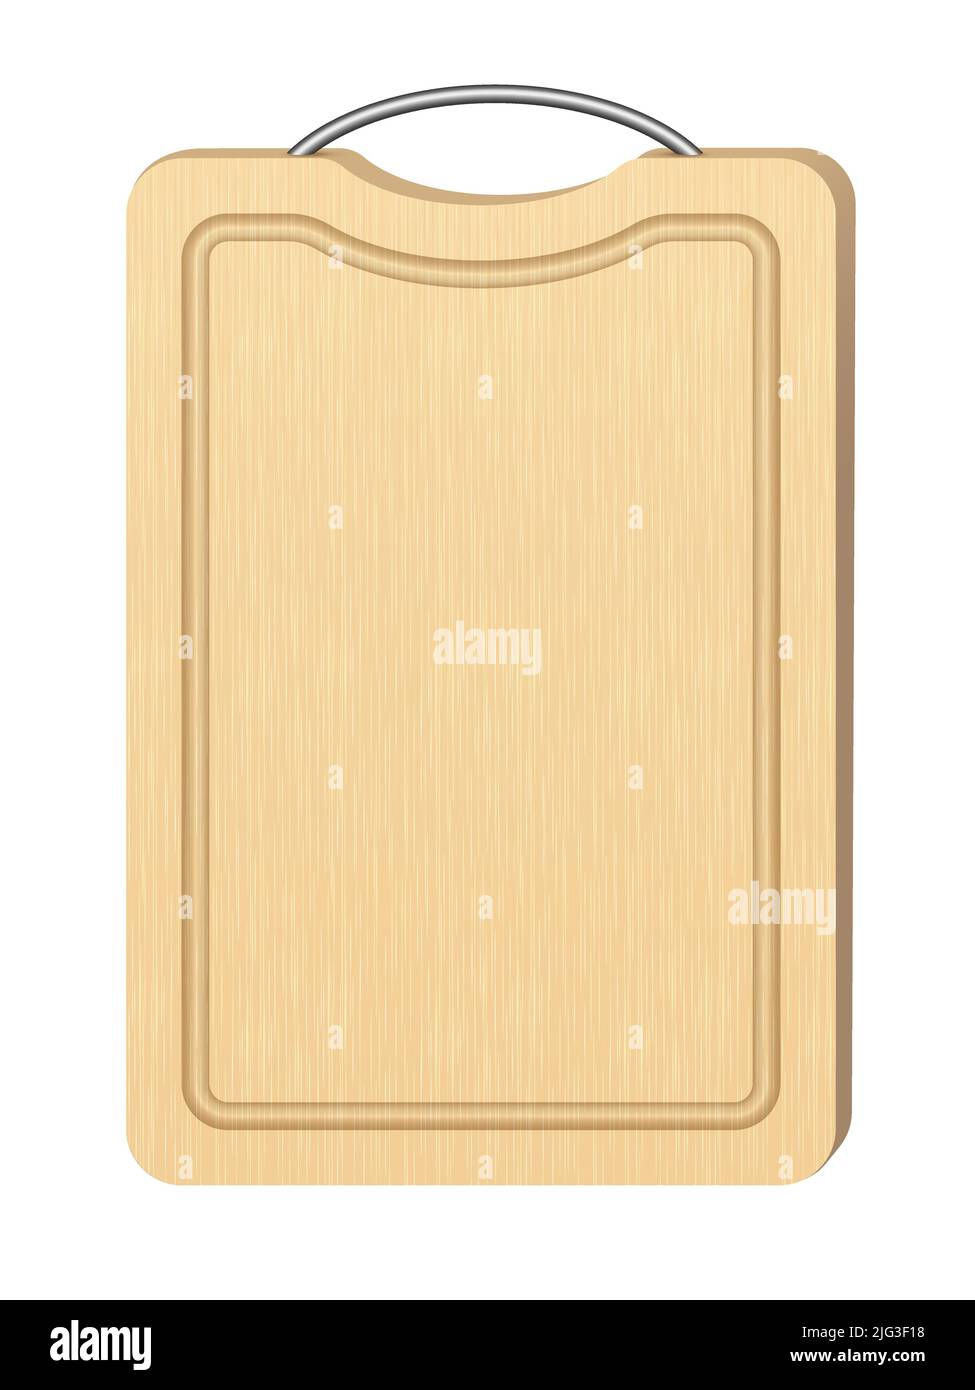 Wooden cutting board for kitchen. Cooking food tool simple design vector illustration. Empty clean plank for chopping with smooth surface, border and Stock Vector